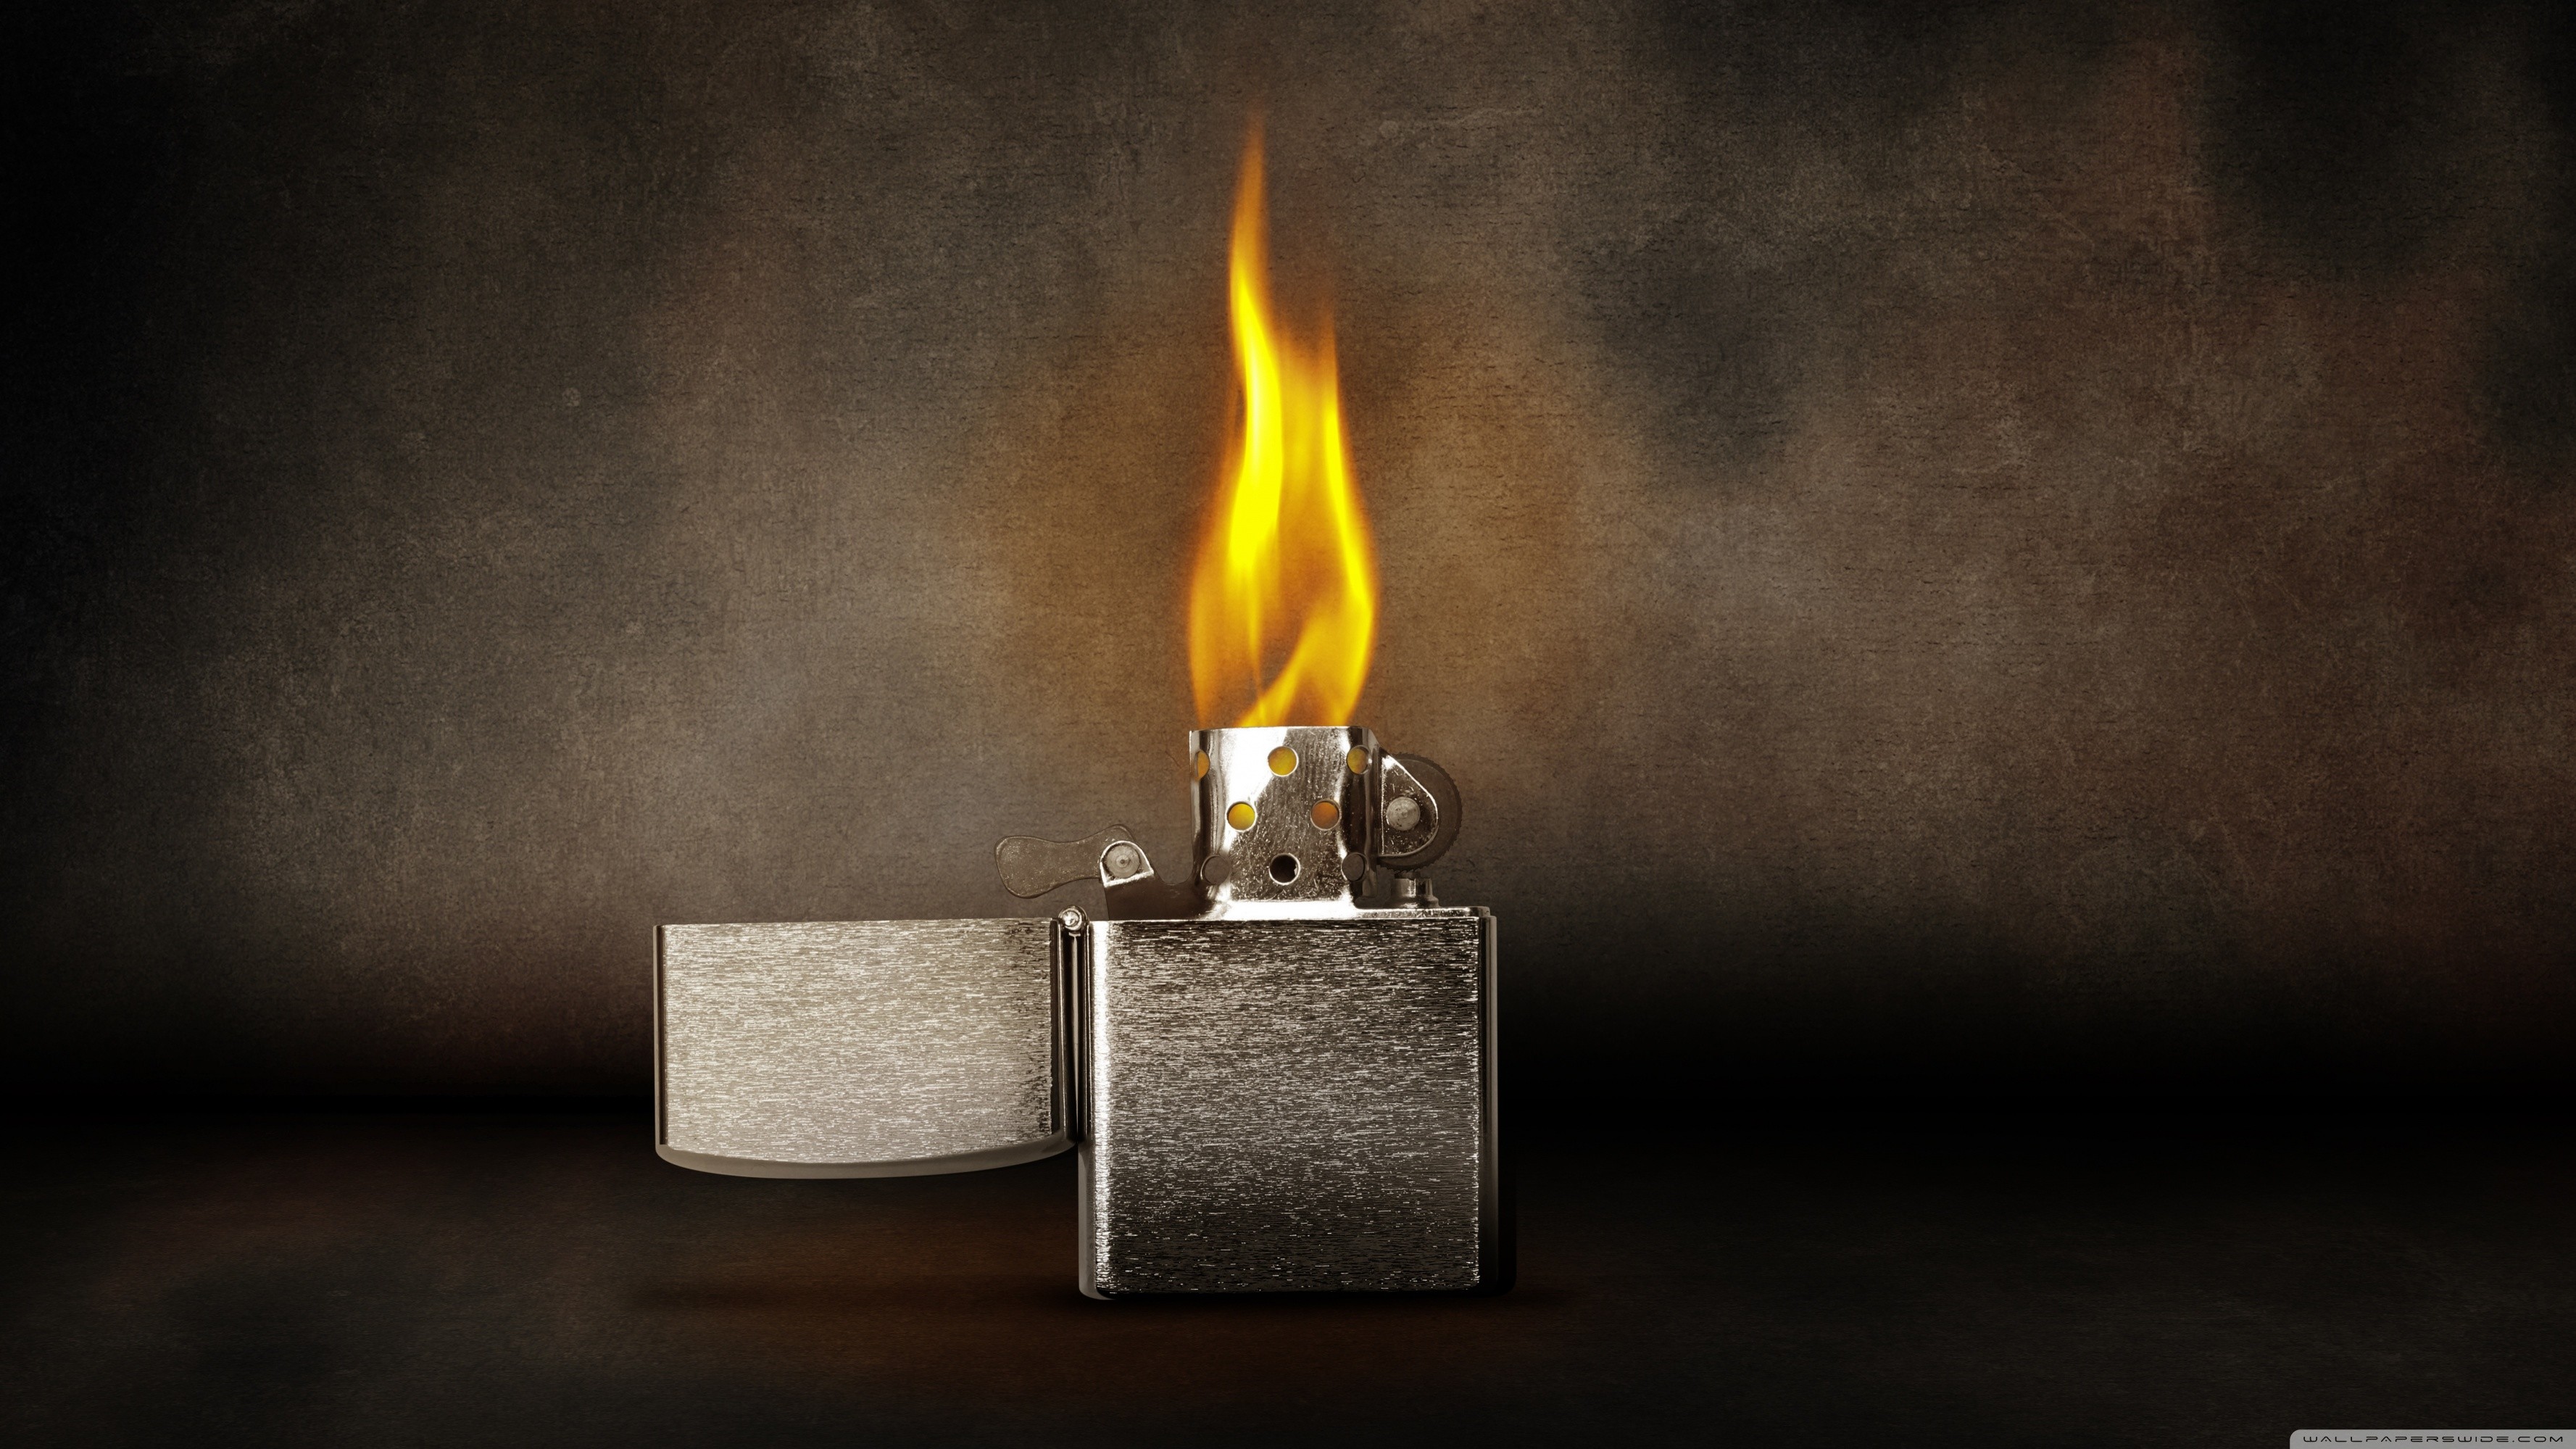 Full HD Wallpapers of 2018 Zippo Lighters (50+ pictures)